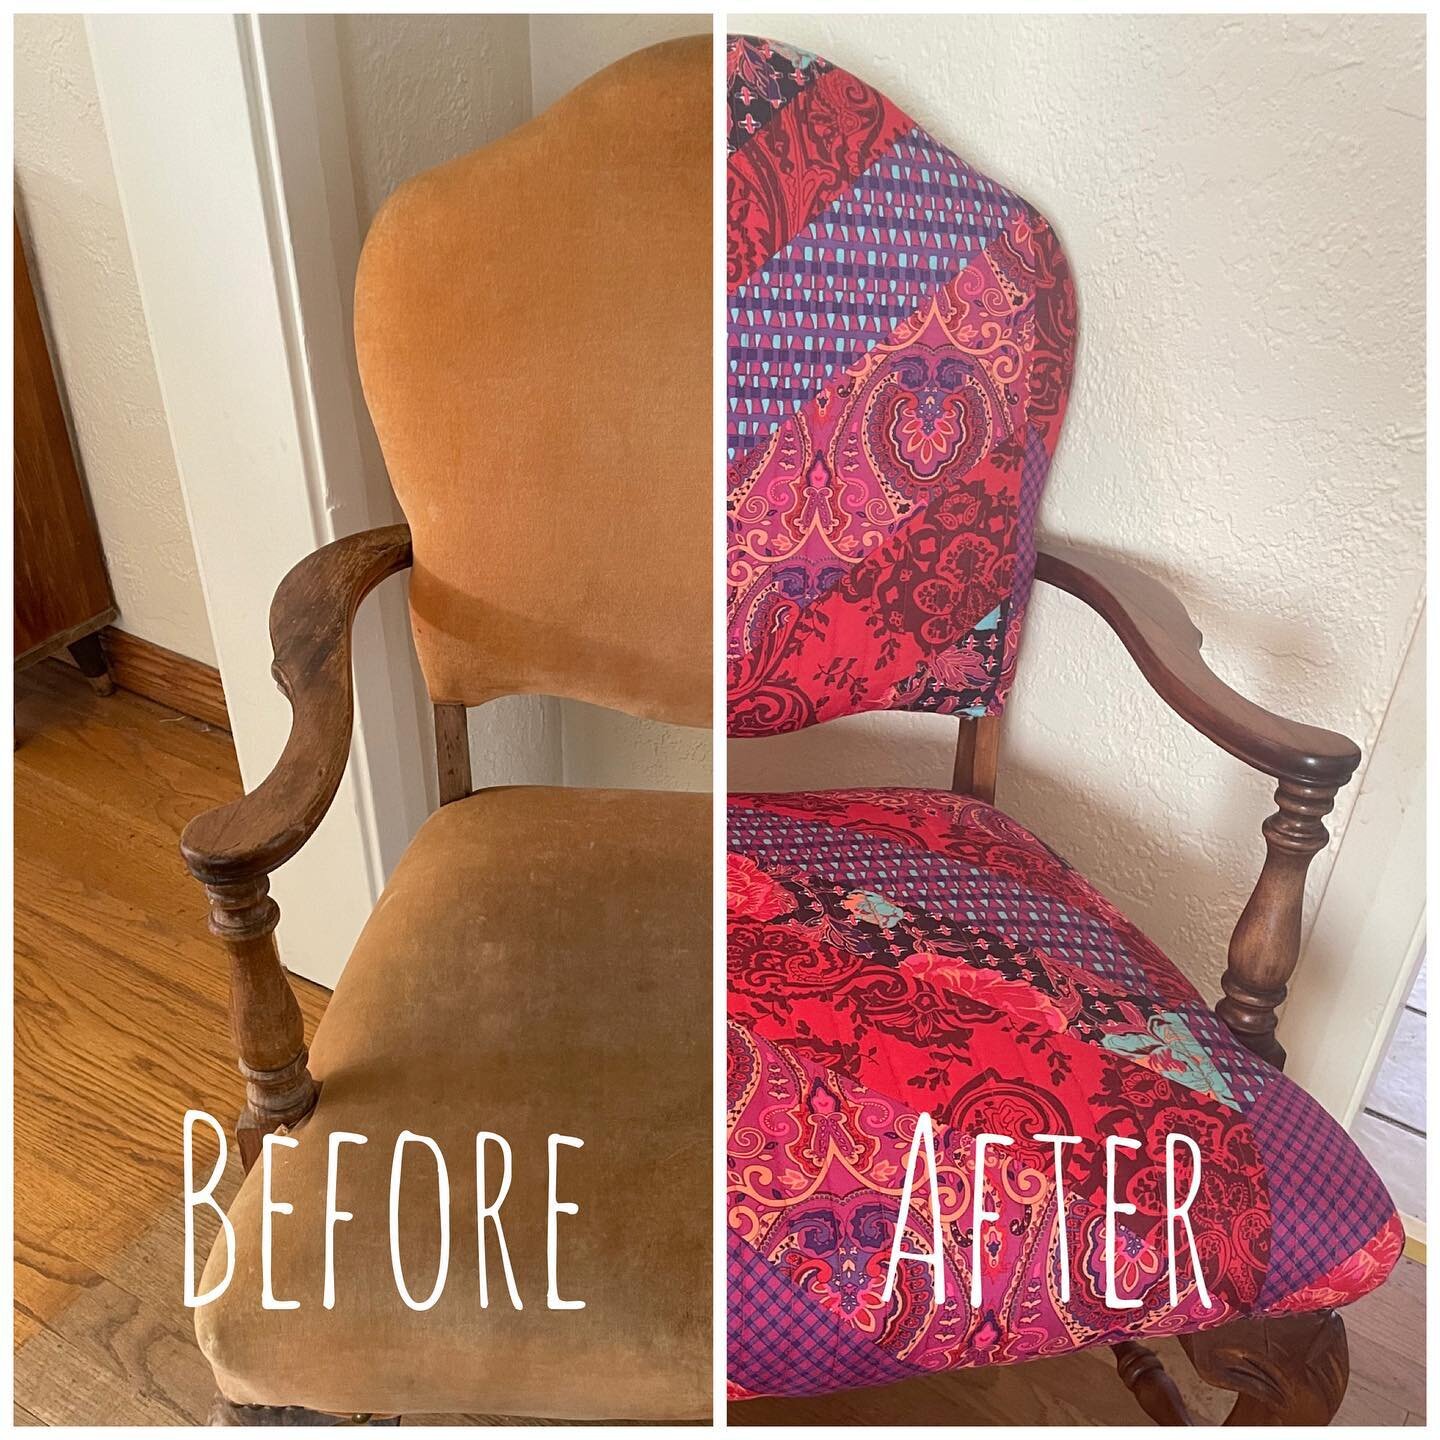 My client wanted to recover this chair that has been in her family for generations with a quilt that her and her husband have had for years. The final result is a beloved family heirloom that can go on to live another century.

#sewnerdy #upholstery 